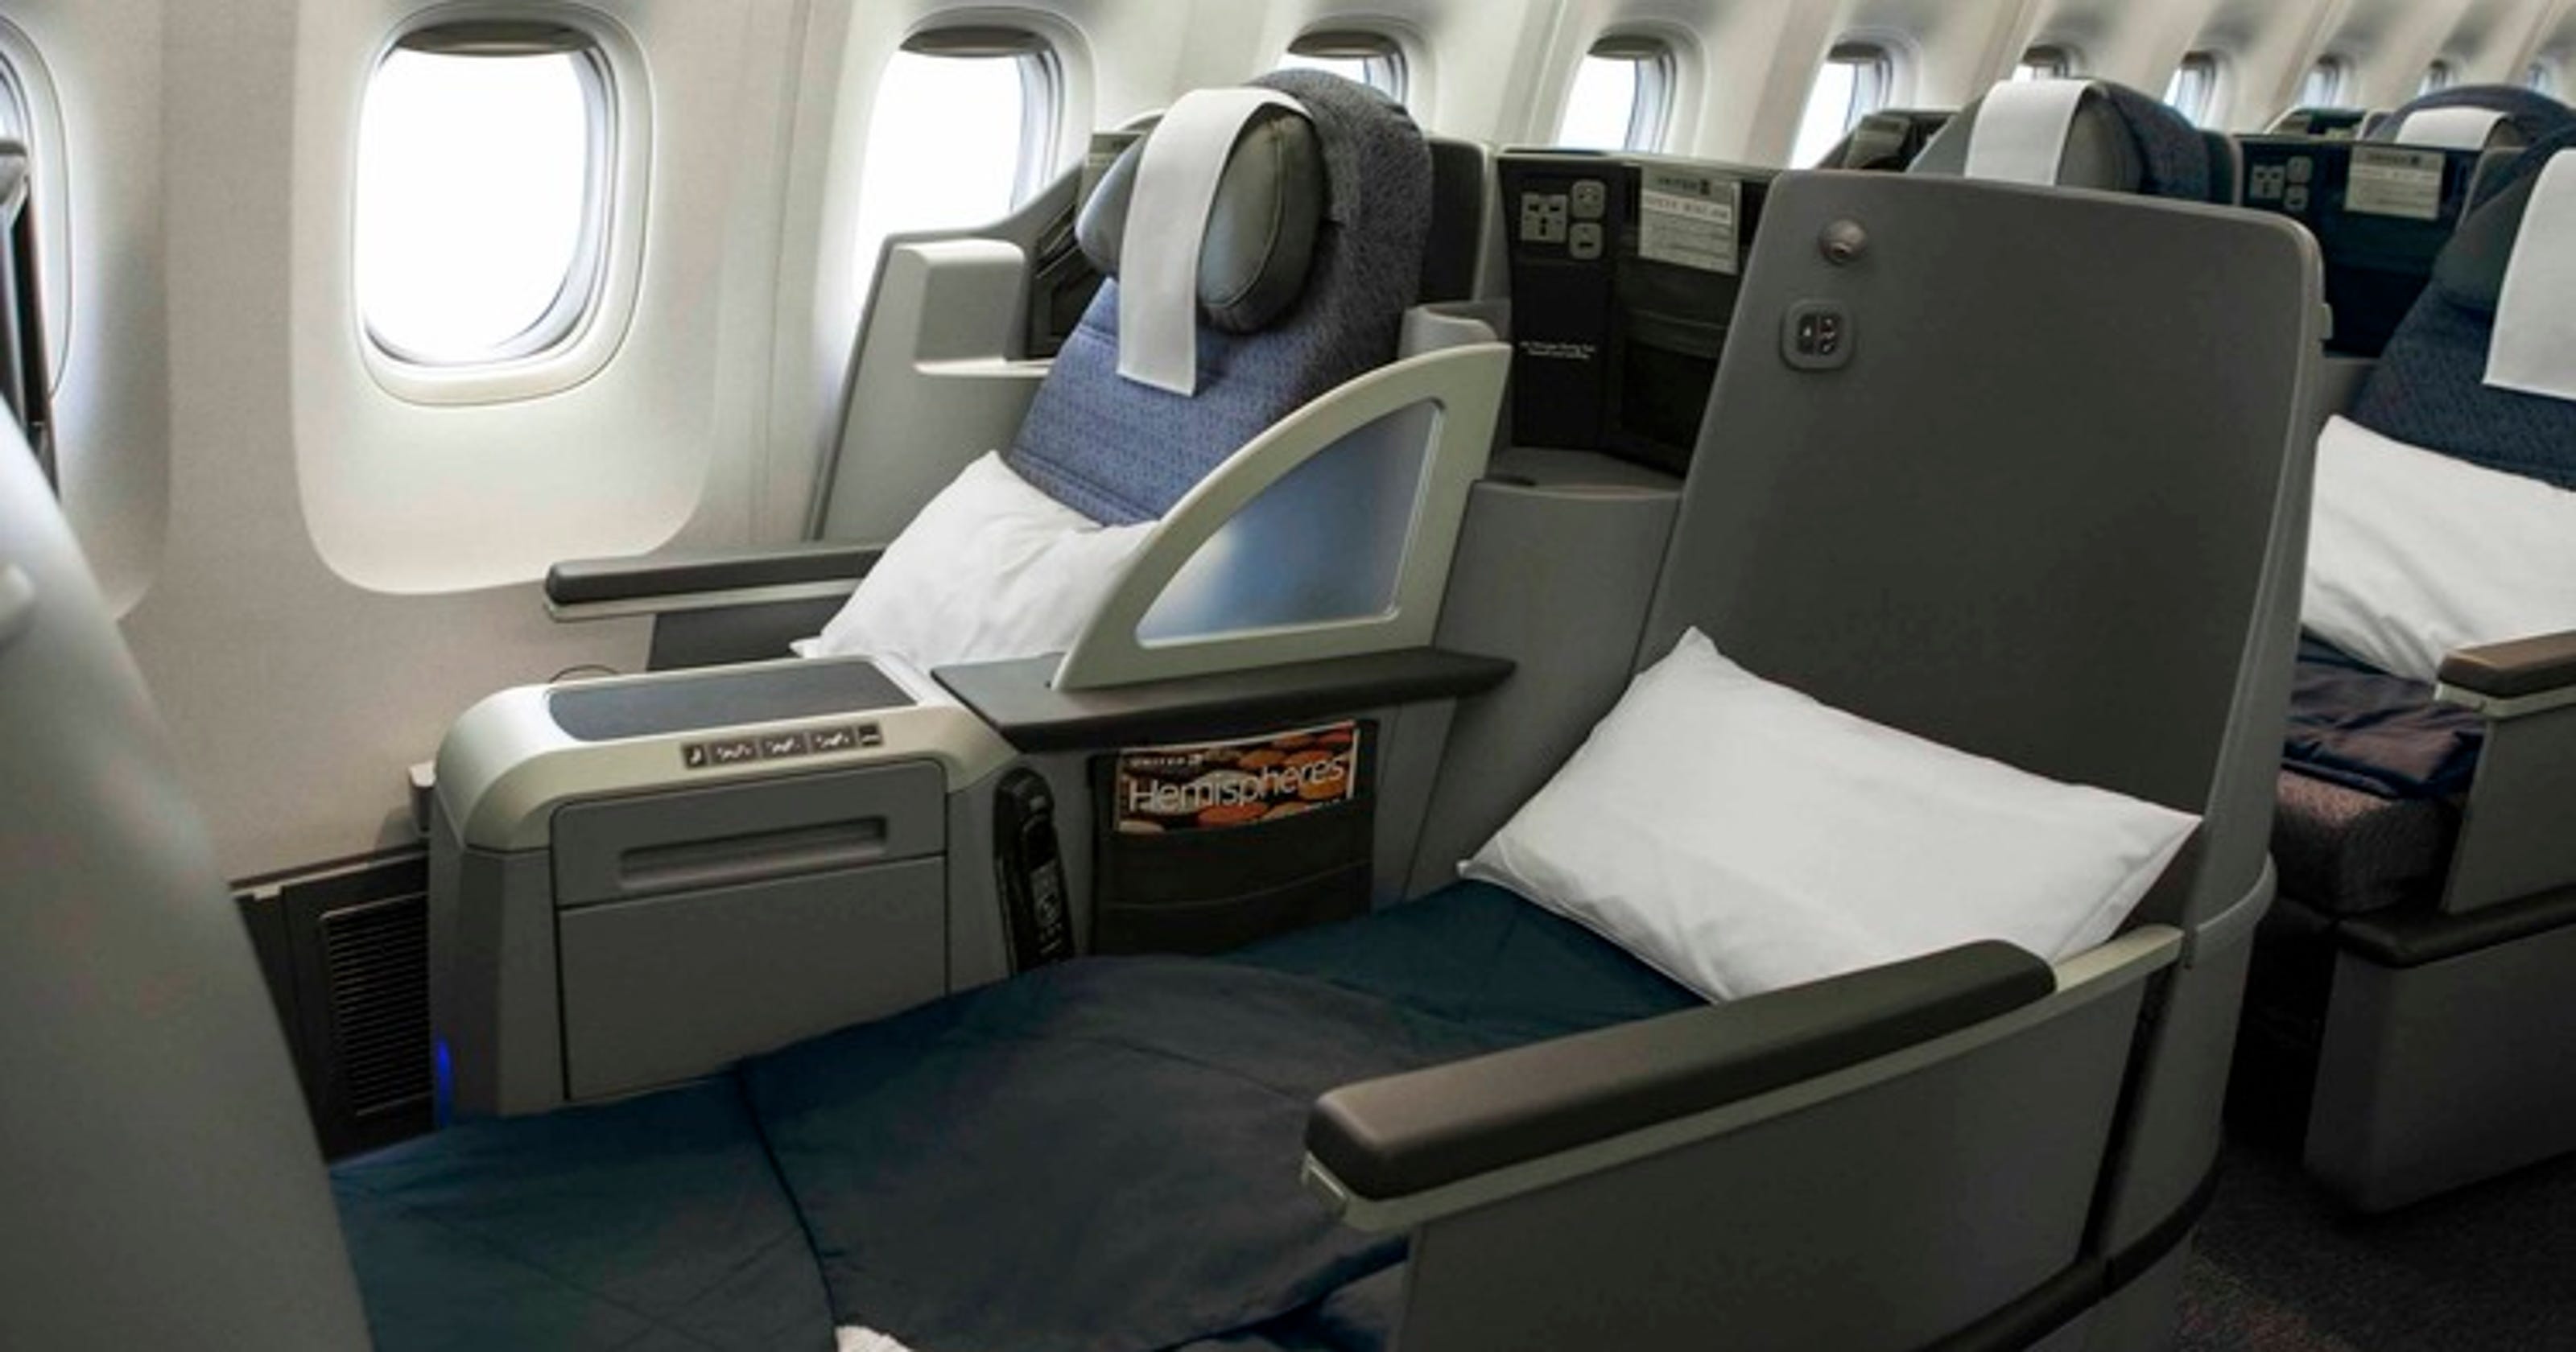 U.S. airlines try lie-flat seats on cross-country routes